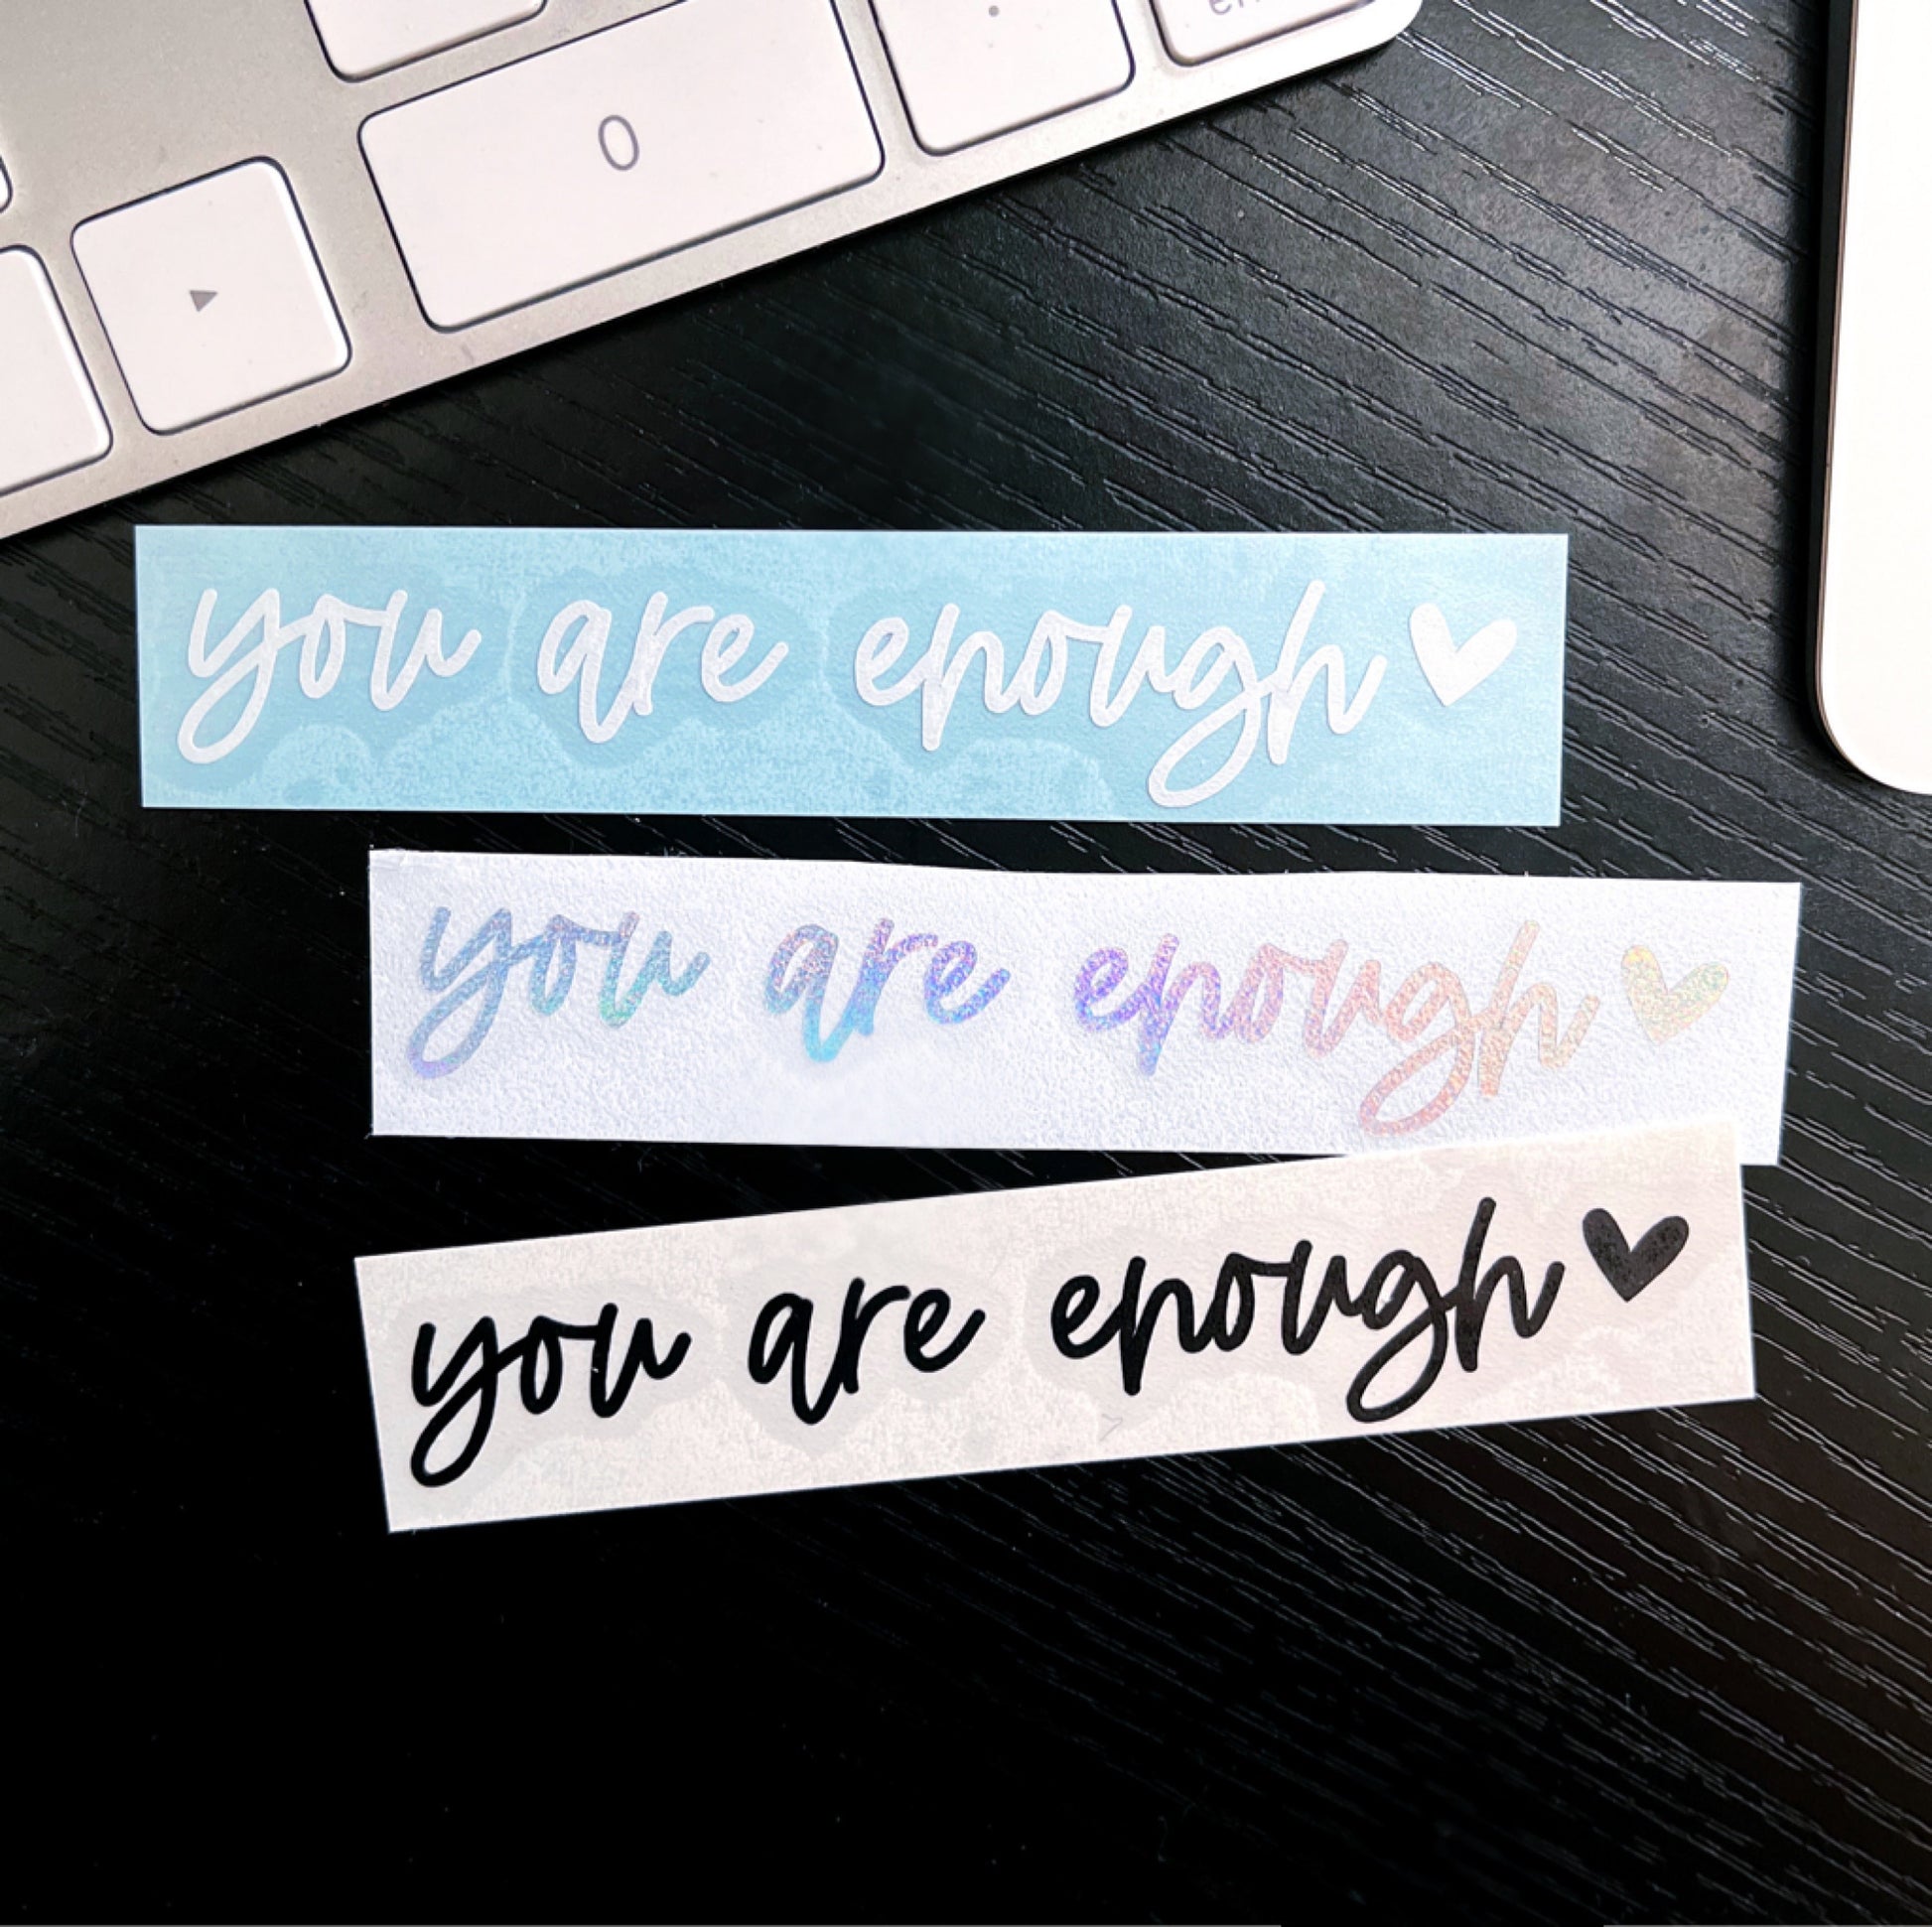 You Are Enough Mirror Sticker. Positive Affirmations for Mental Health. Car Accessories Gifts.